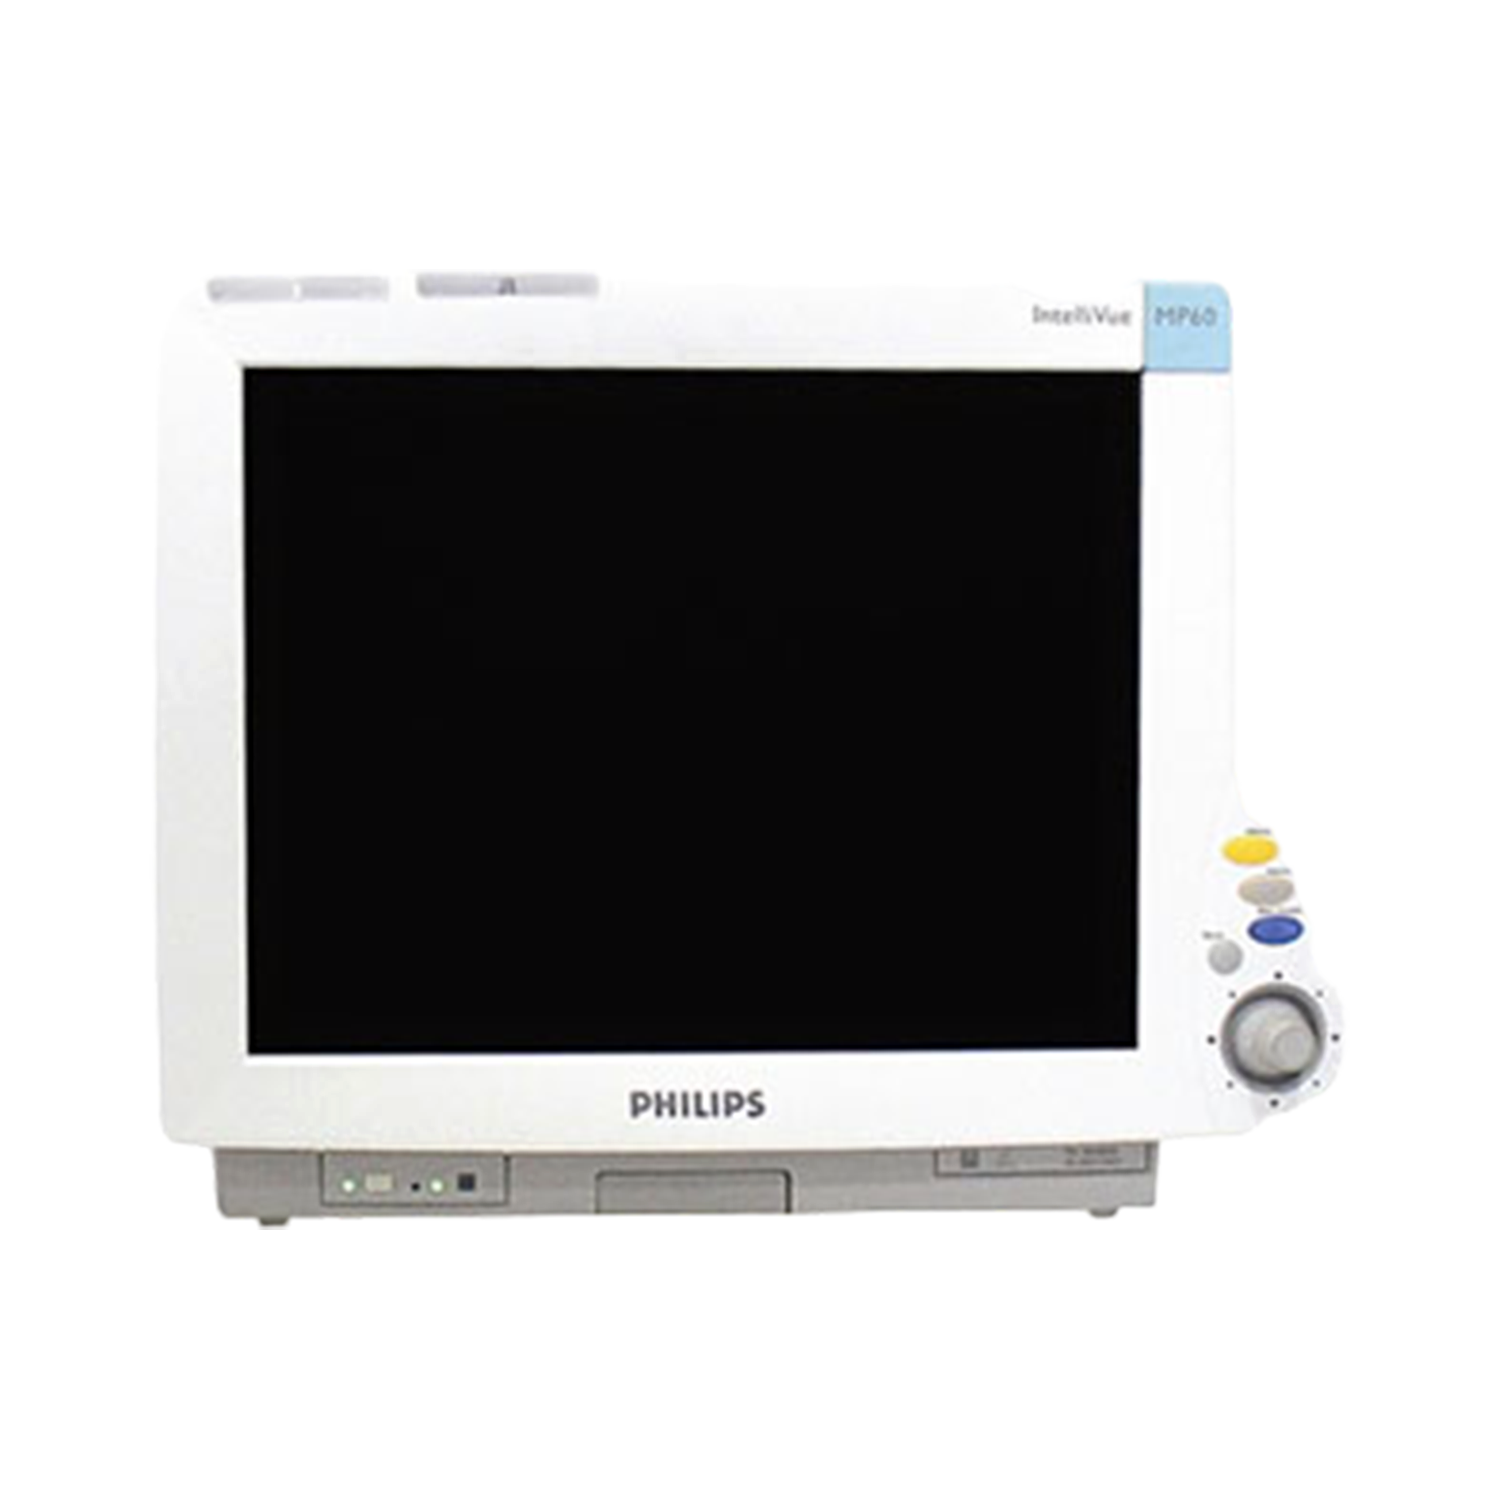 Buy Philips IntelliVue M40 M8003A Patient Monitor Online